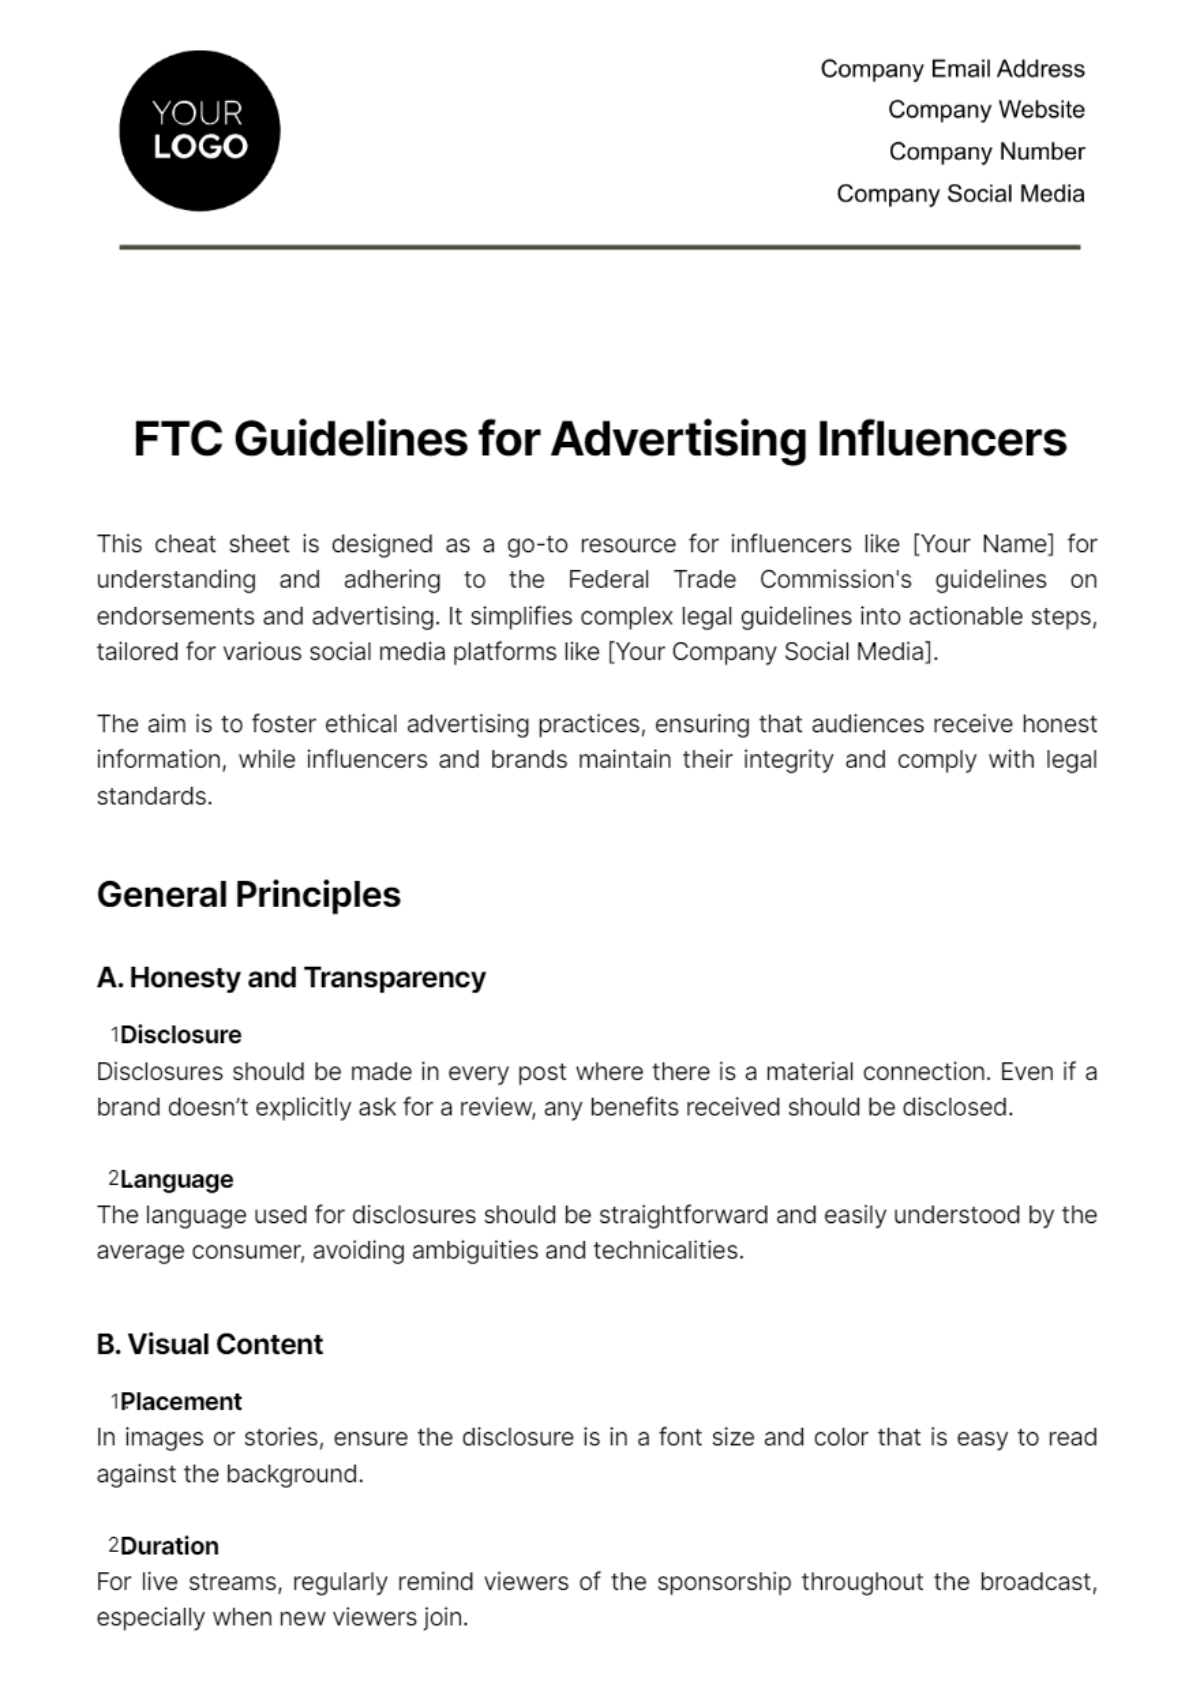 Free FTC Guidelines for Advertising Influencers Template